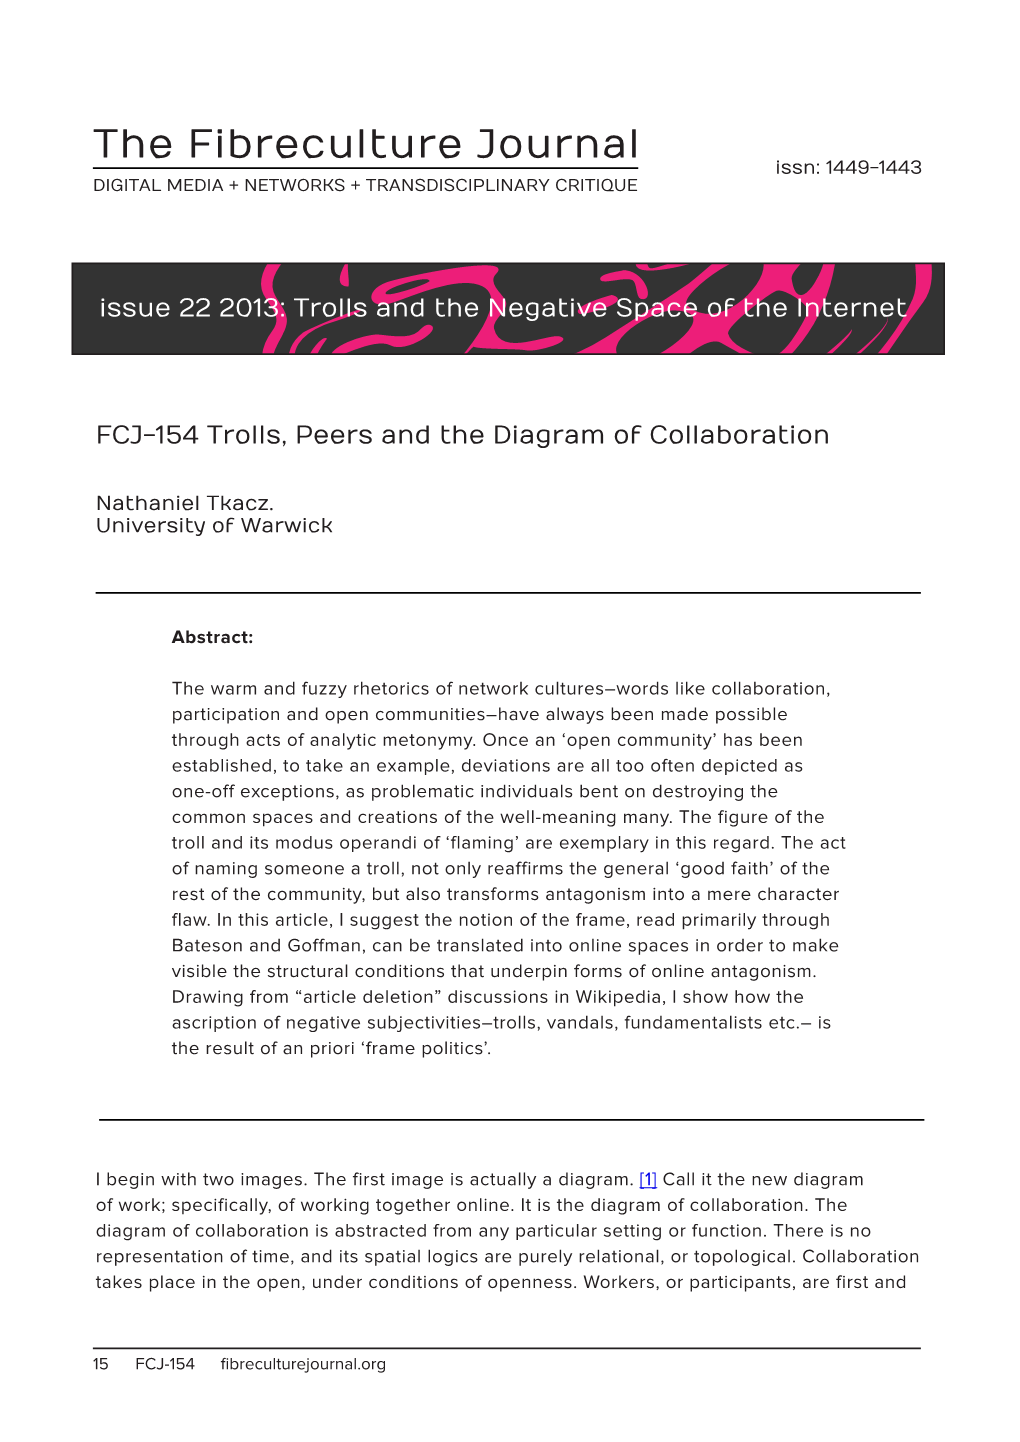 FCJ-154 Trolls, Peers and the Diagram of Collaboration